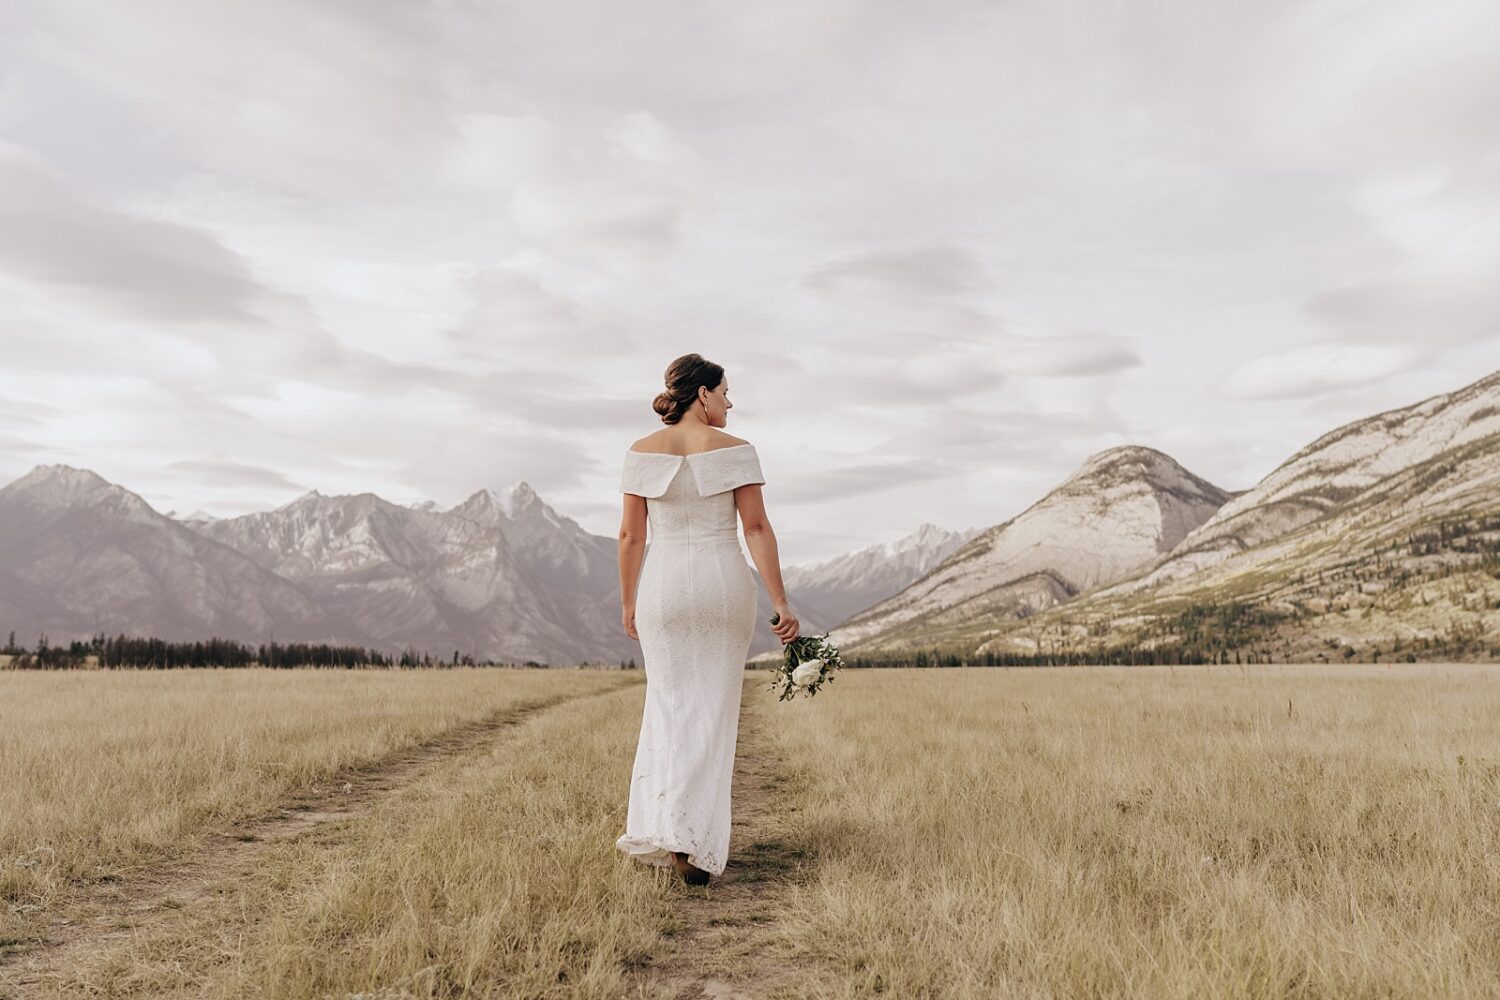 Jasper elopement photographer. Portraits of bride and groom in a field with mountains in the background.